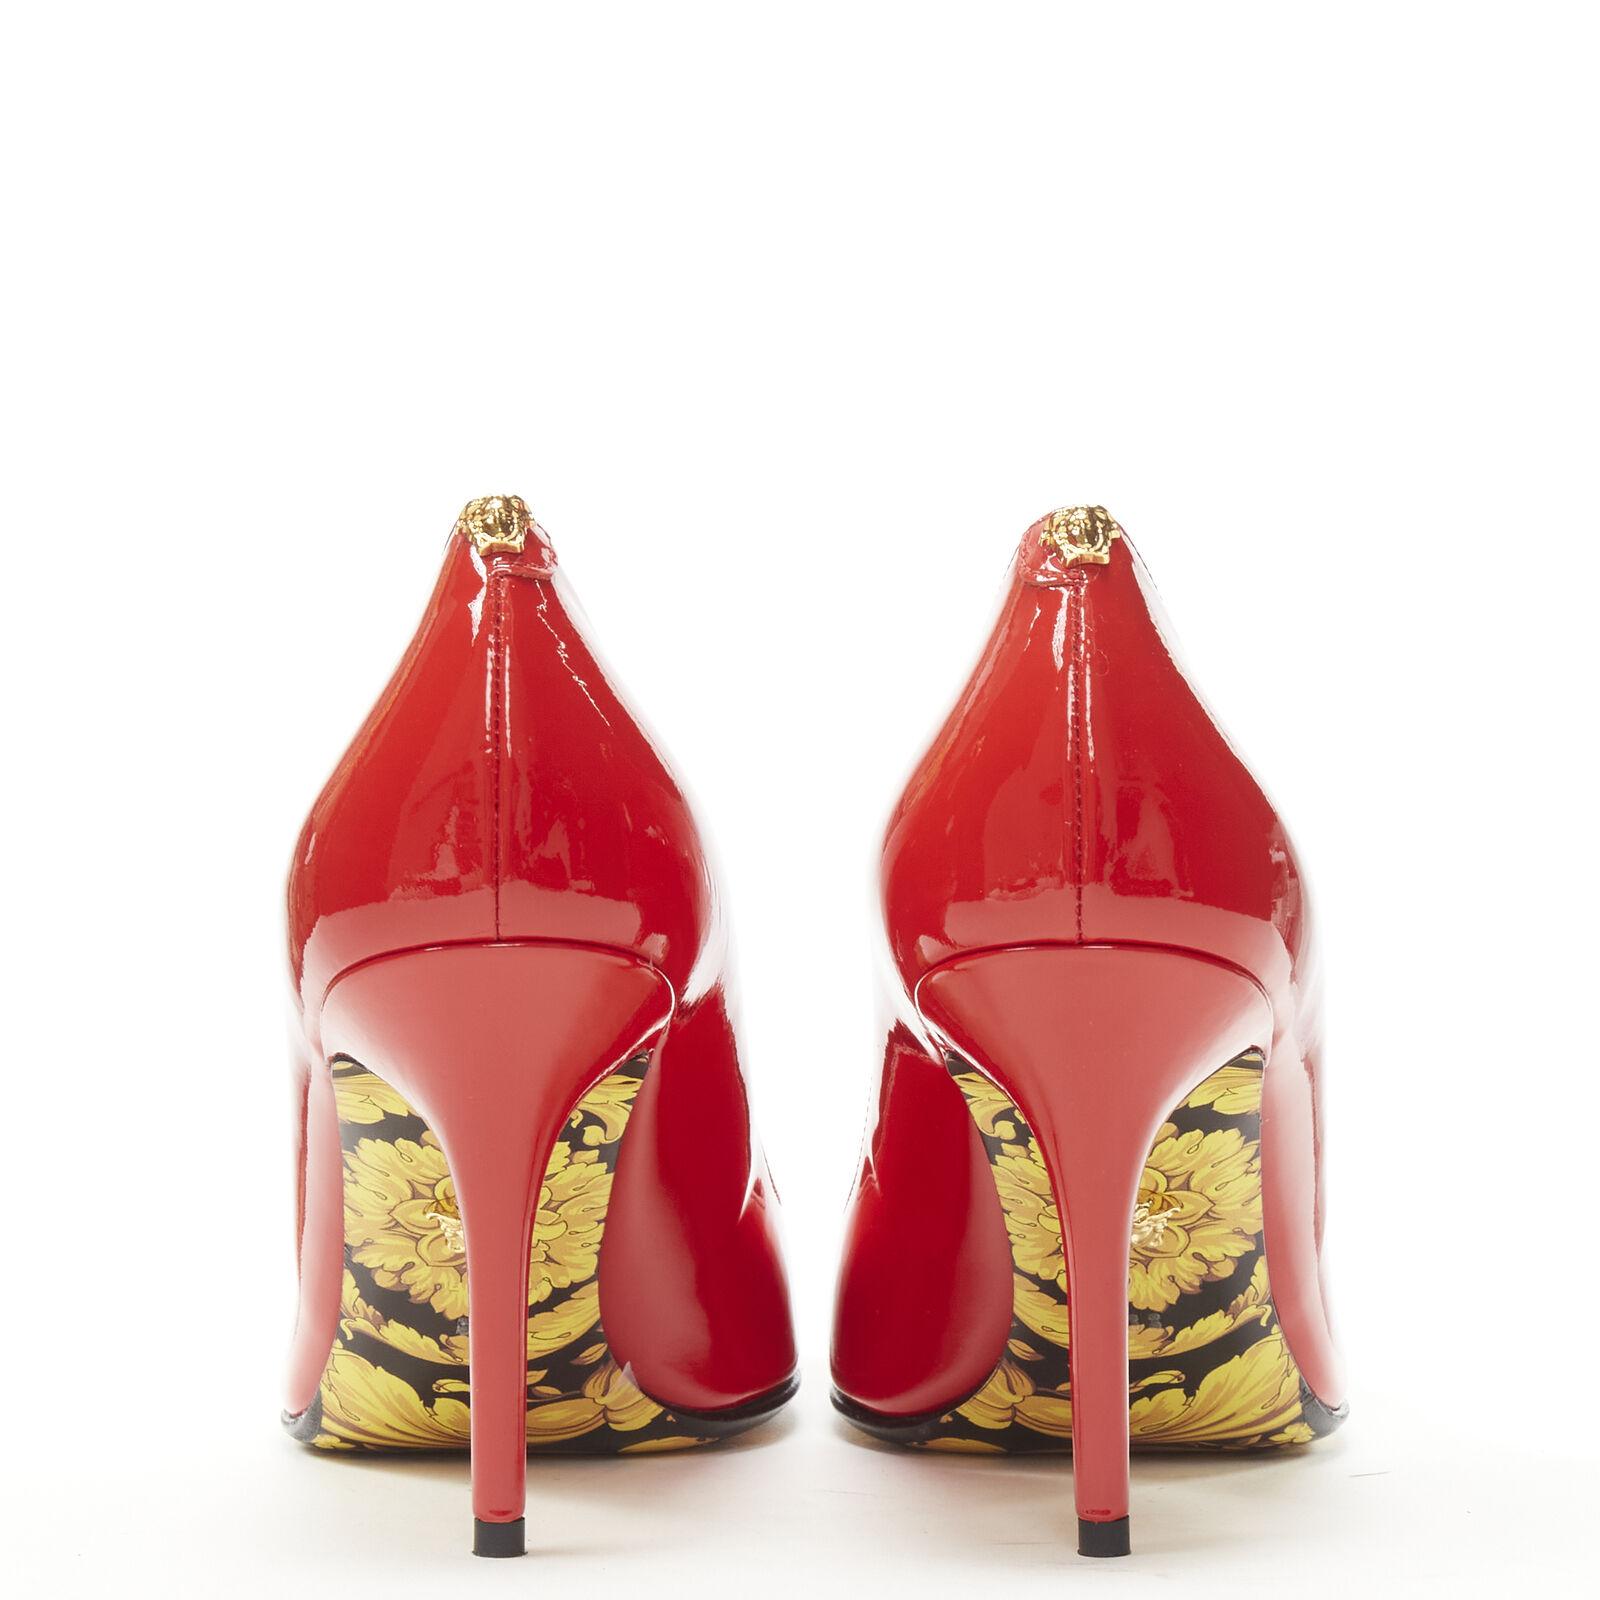 new VERSACE Hibiscus Barocco Eros red patent floral sole Medusa pump US7 EU37 For Sale 1